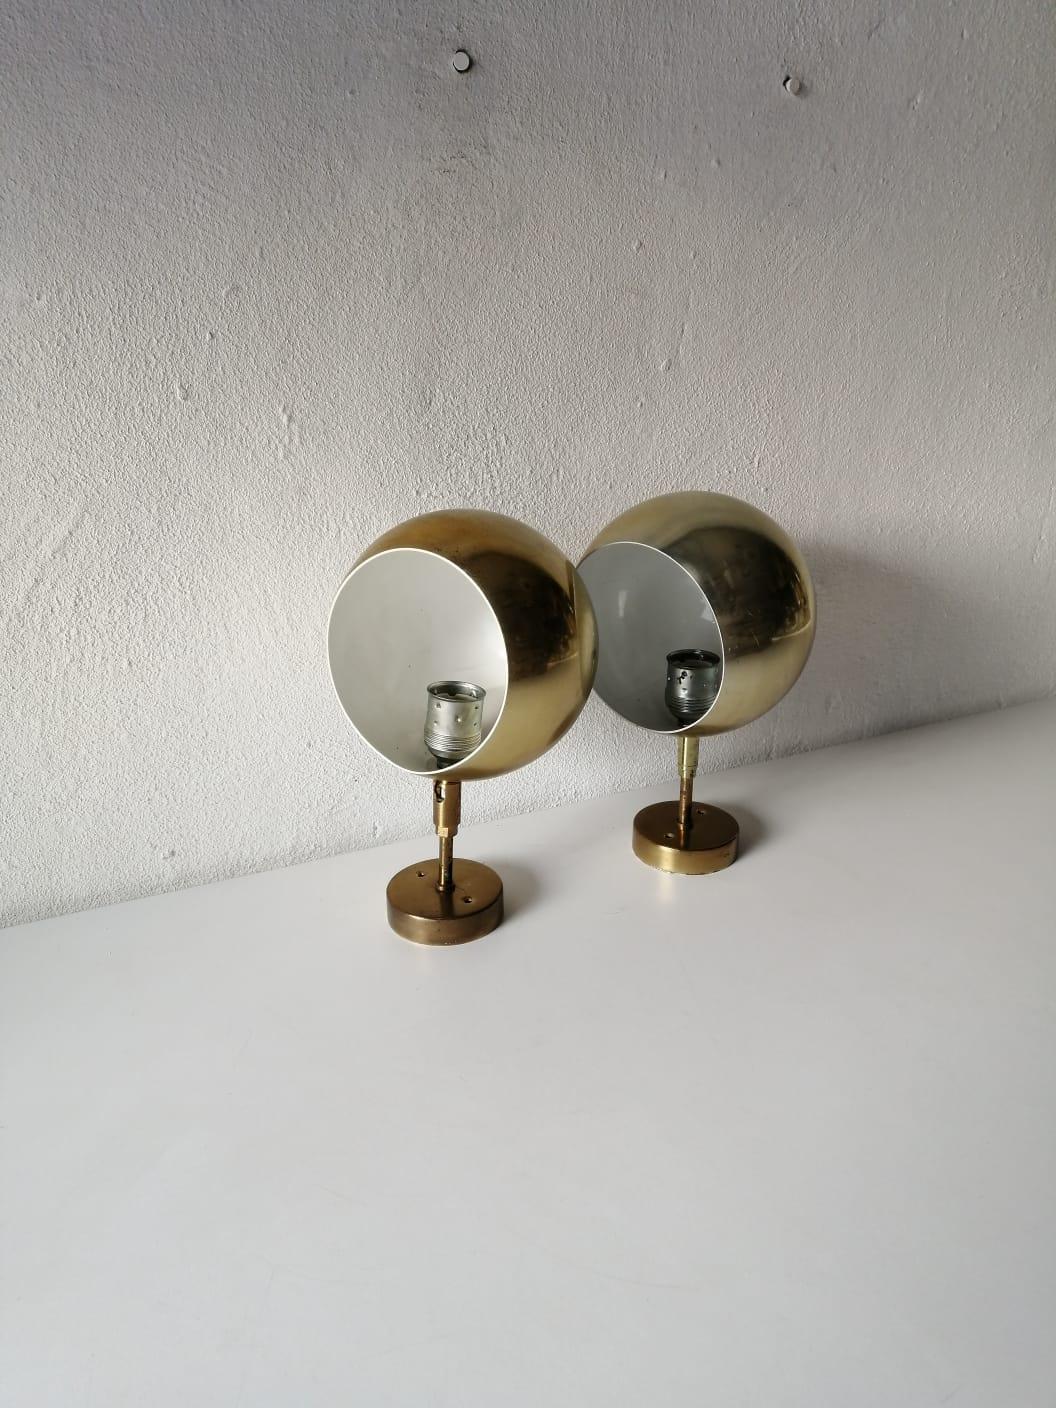 Rare Space Age gold metal pair of sconces by Cosack, 1970s Germany

Very elegant and rare wall lamps. 


Lamps are in very good condition.
These lamps works with E27 standard light bulbs.
Wired and suitable to use in all